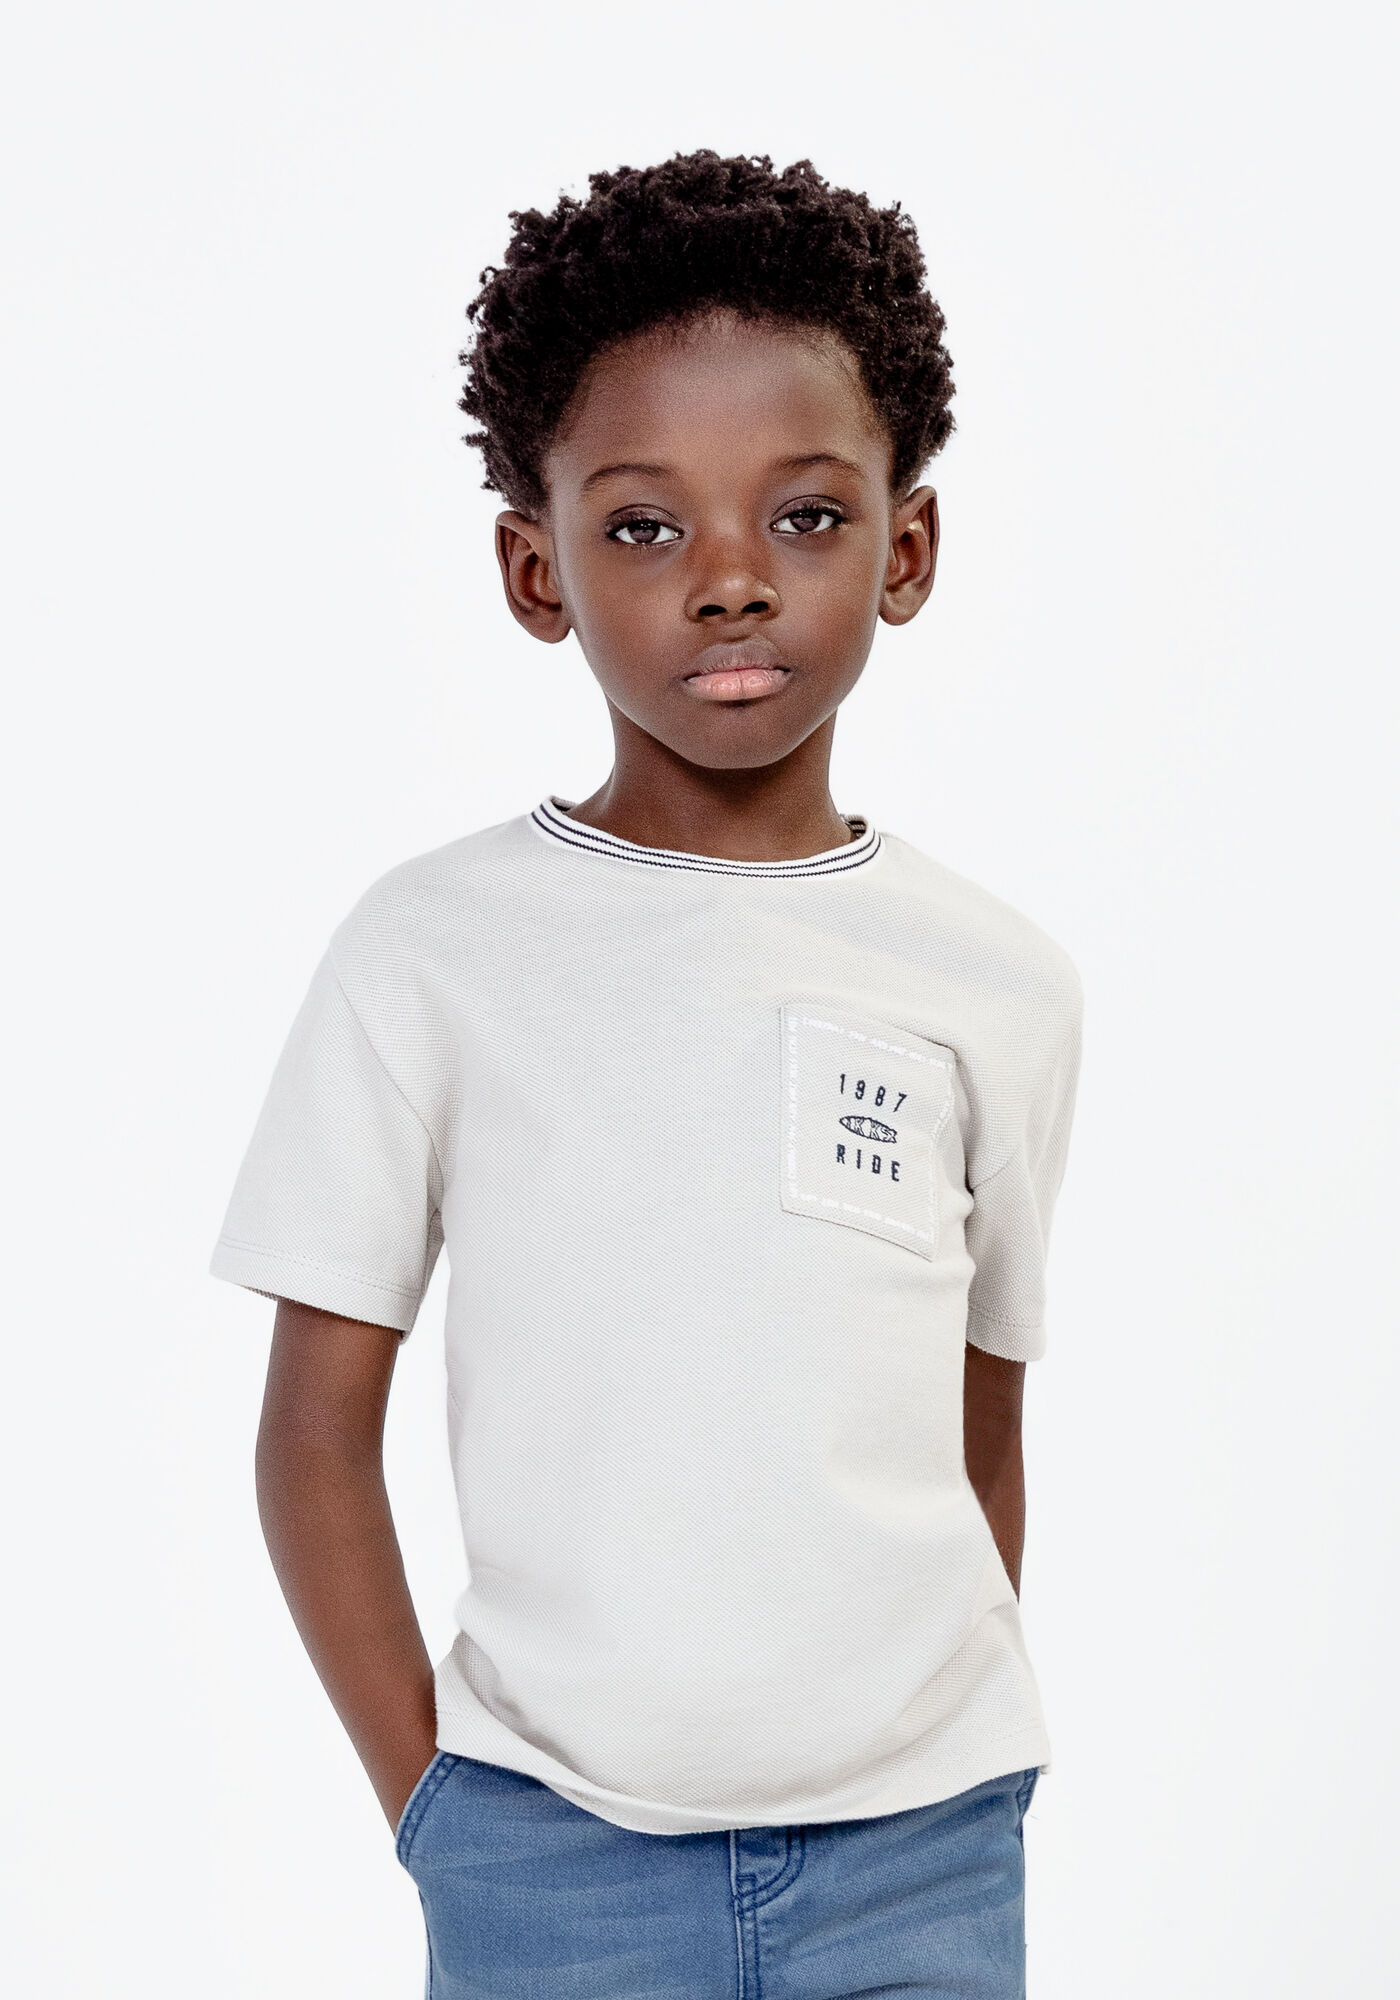 Boys' T-shirt with pocket